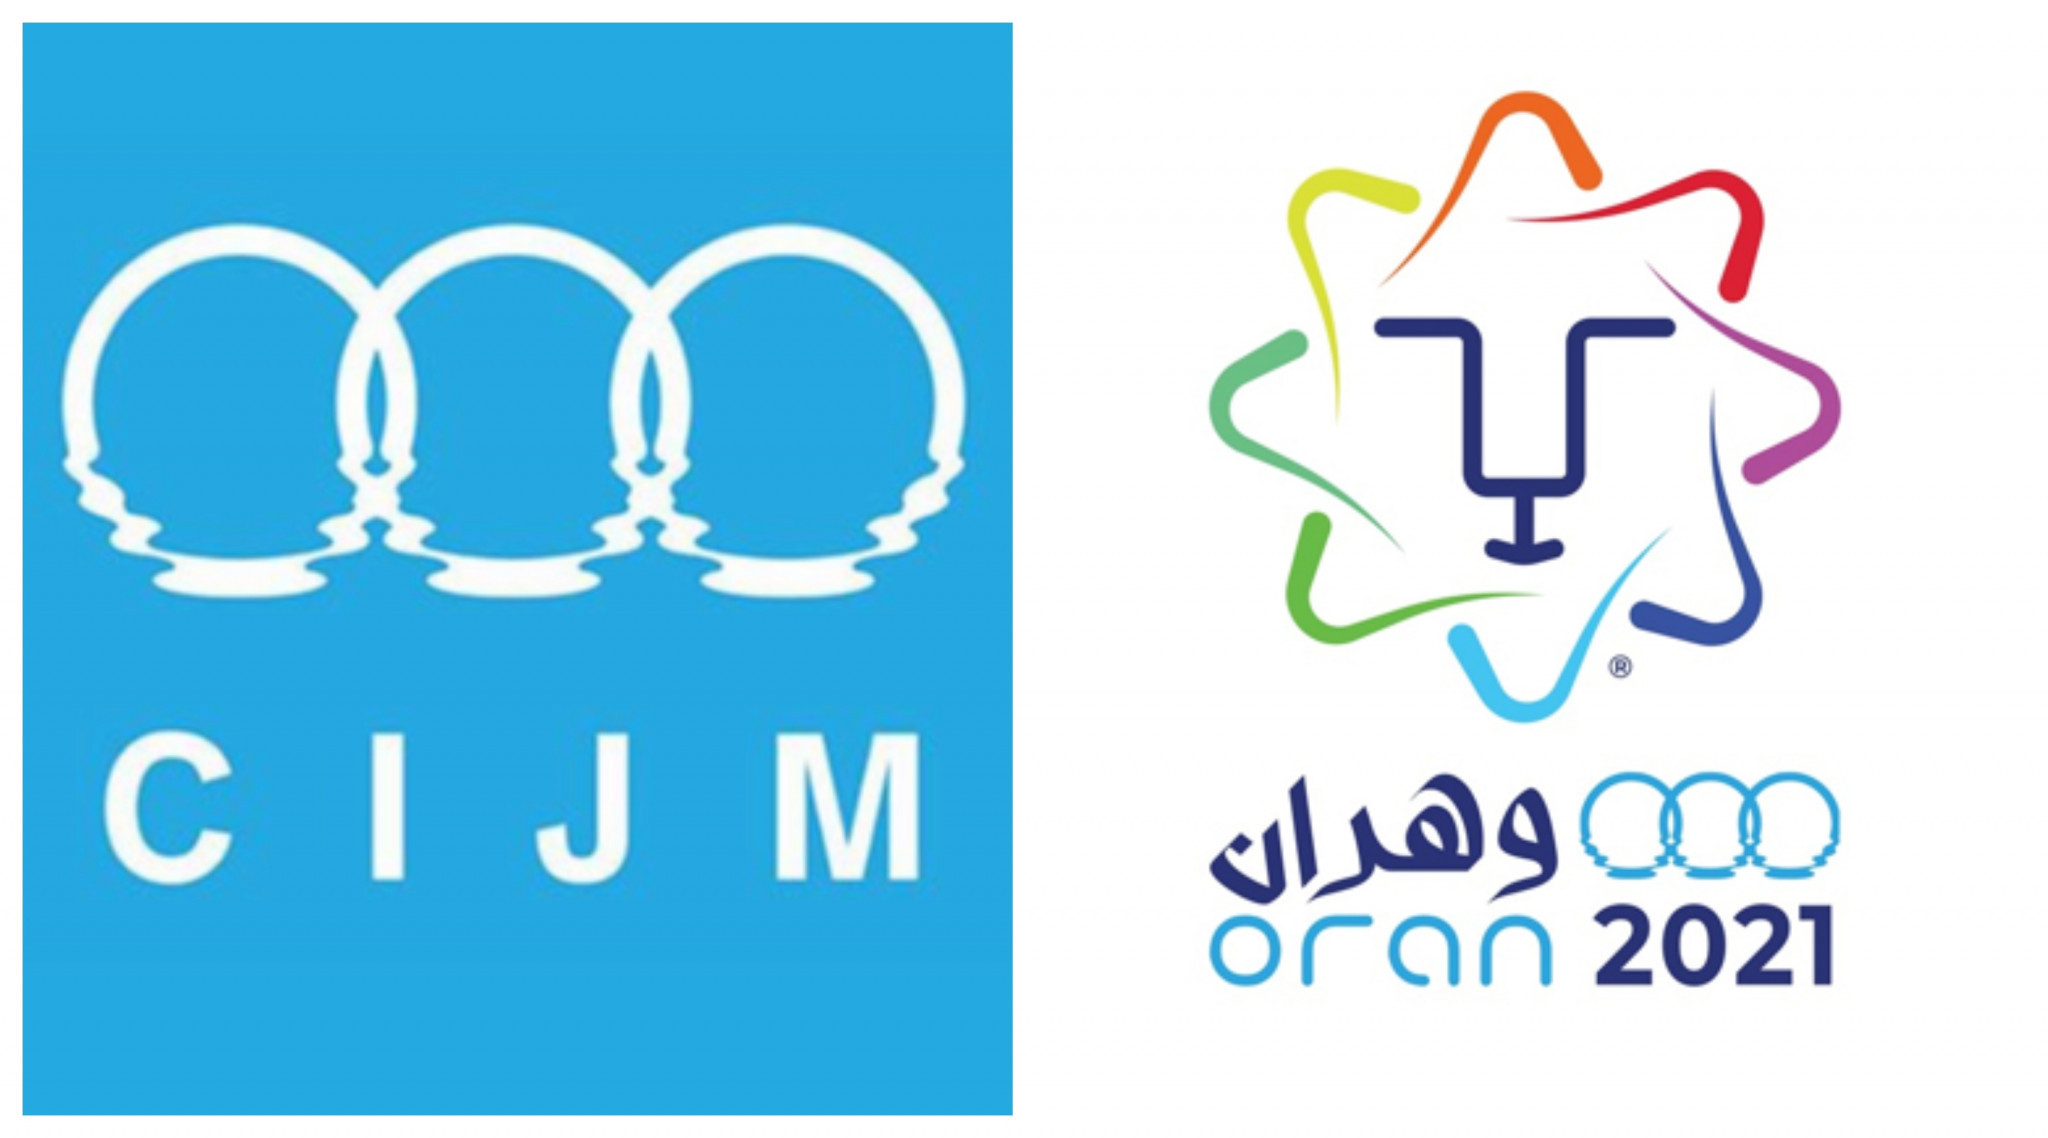 Mediterranean Games in Oran moved back to 2022